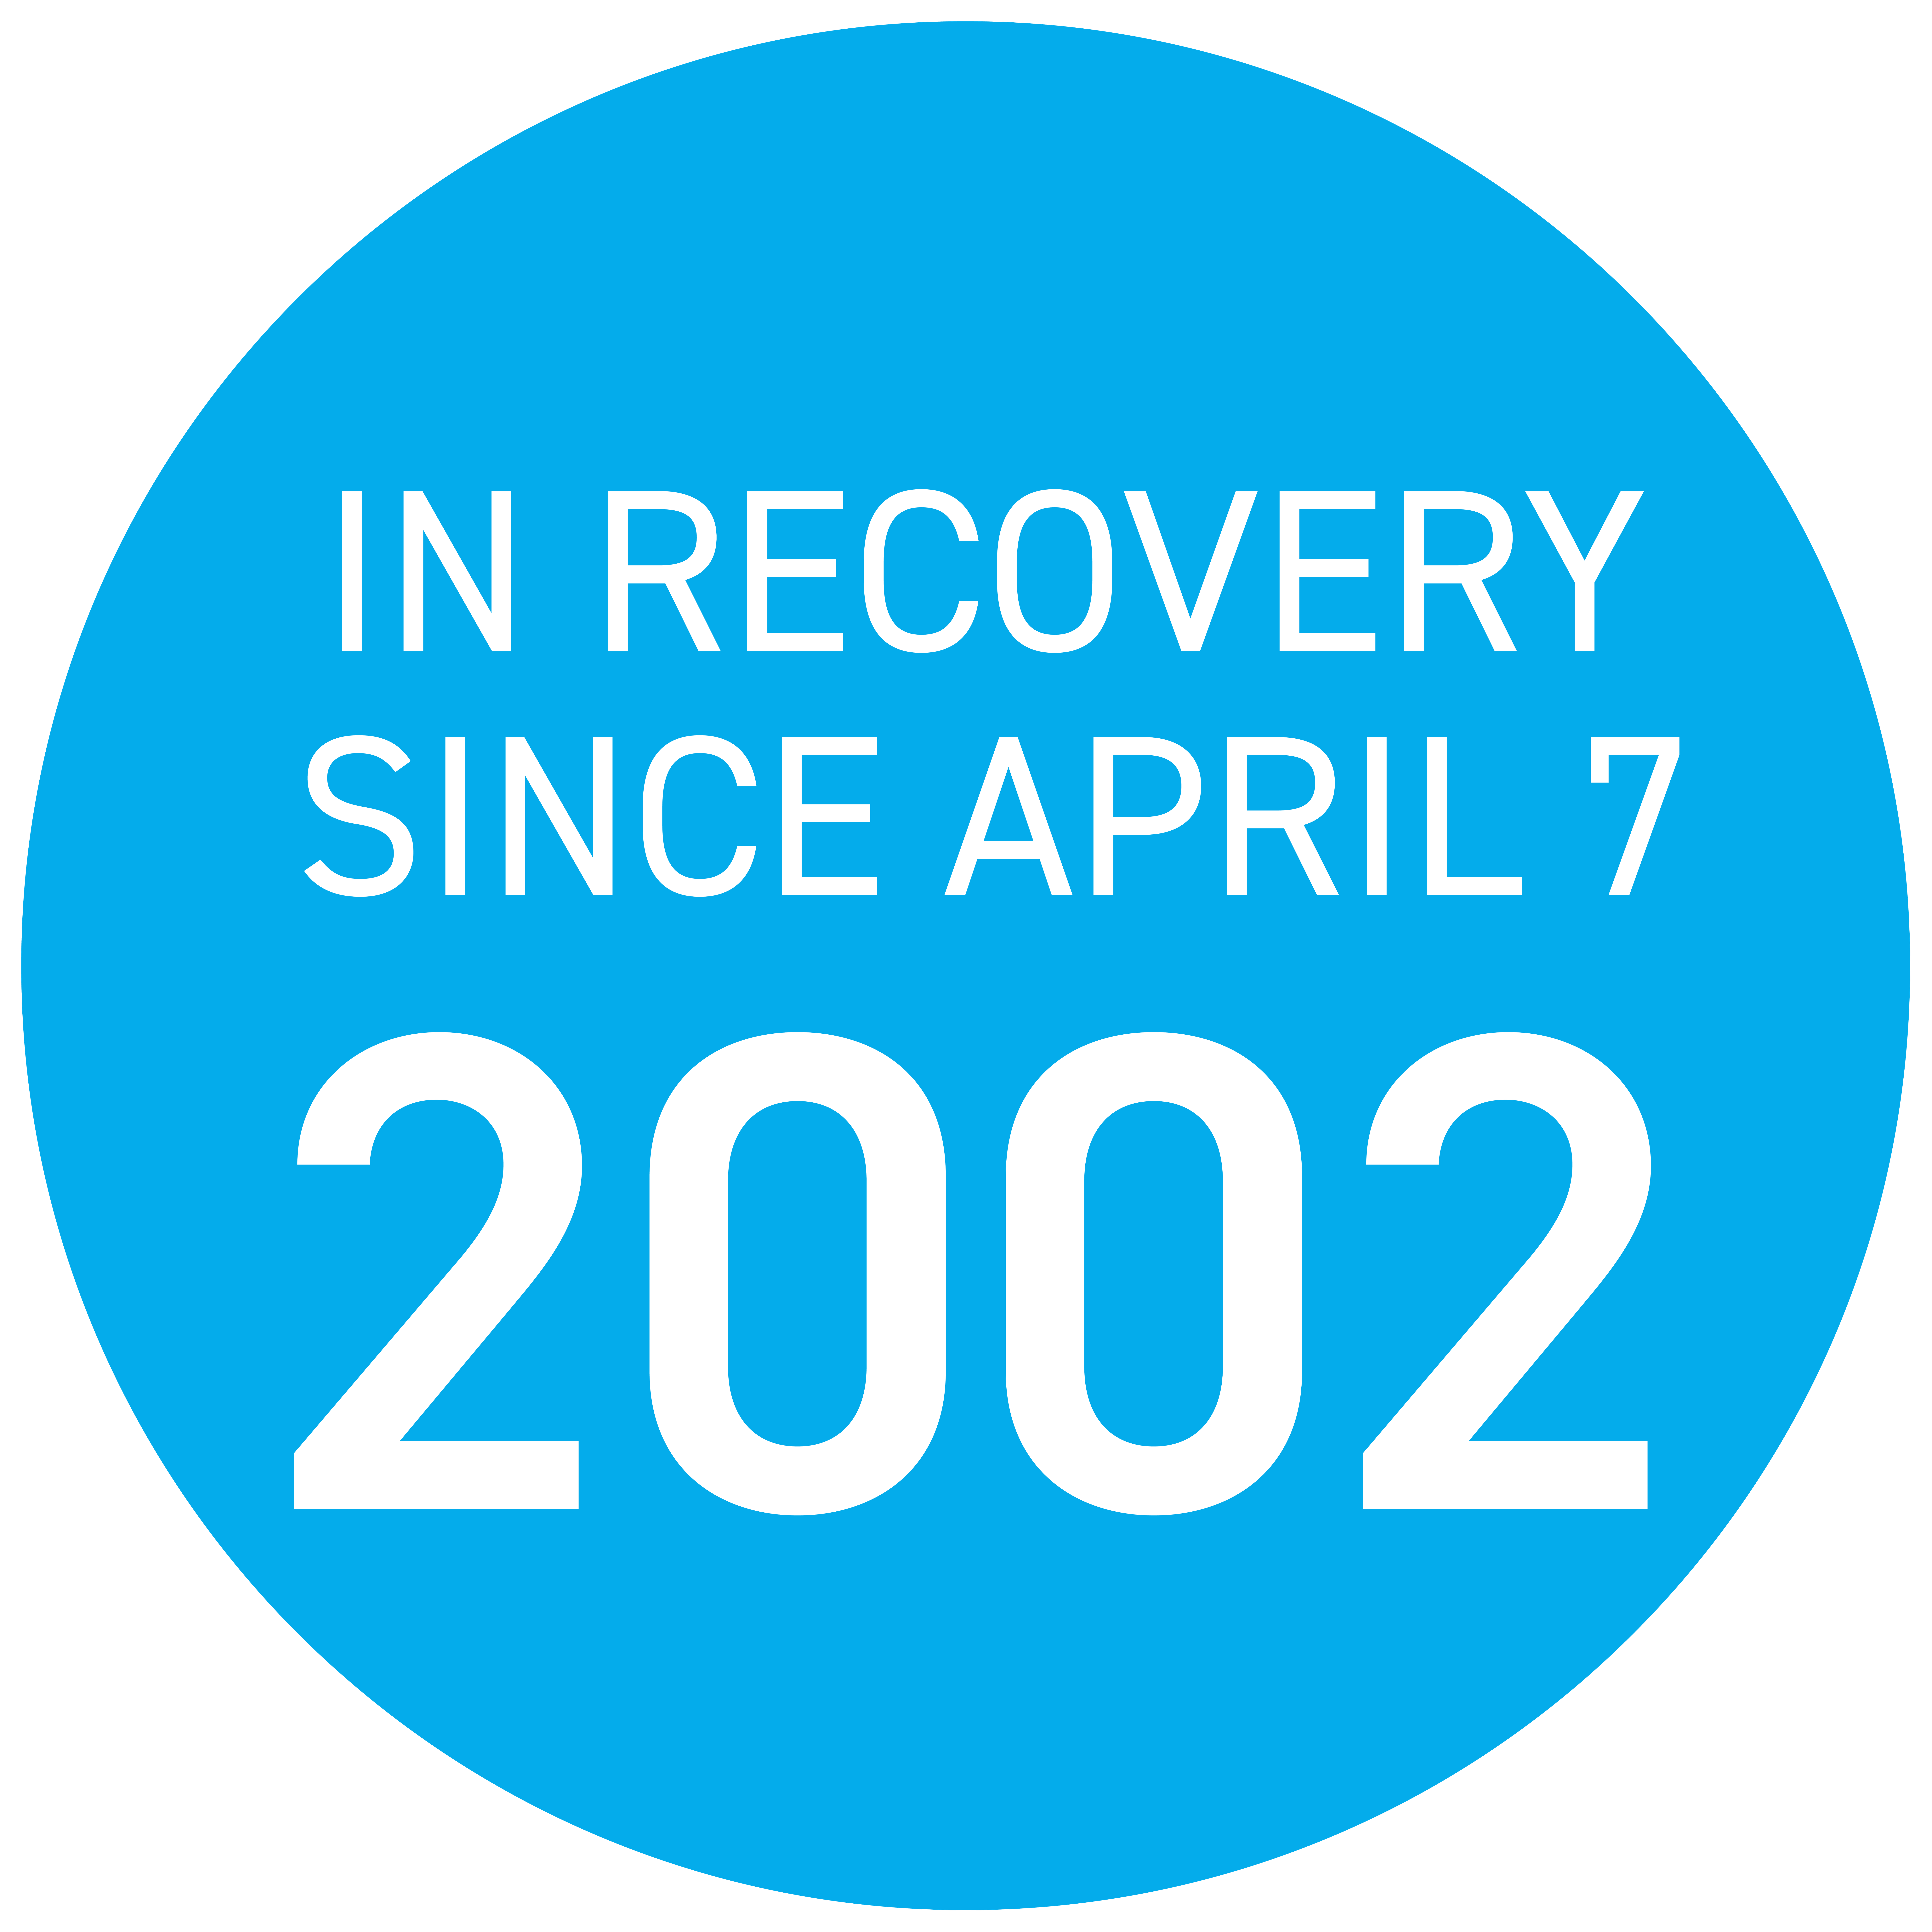 In recovery since April 7, 2002